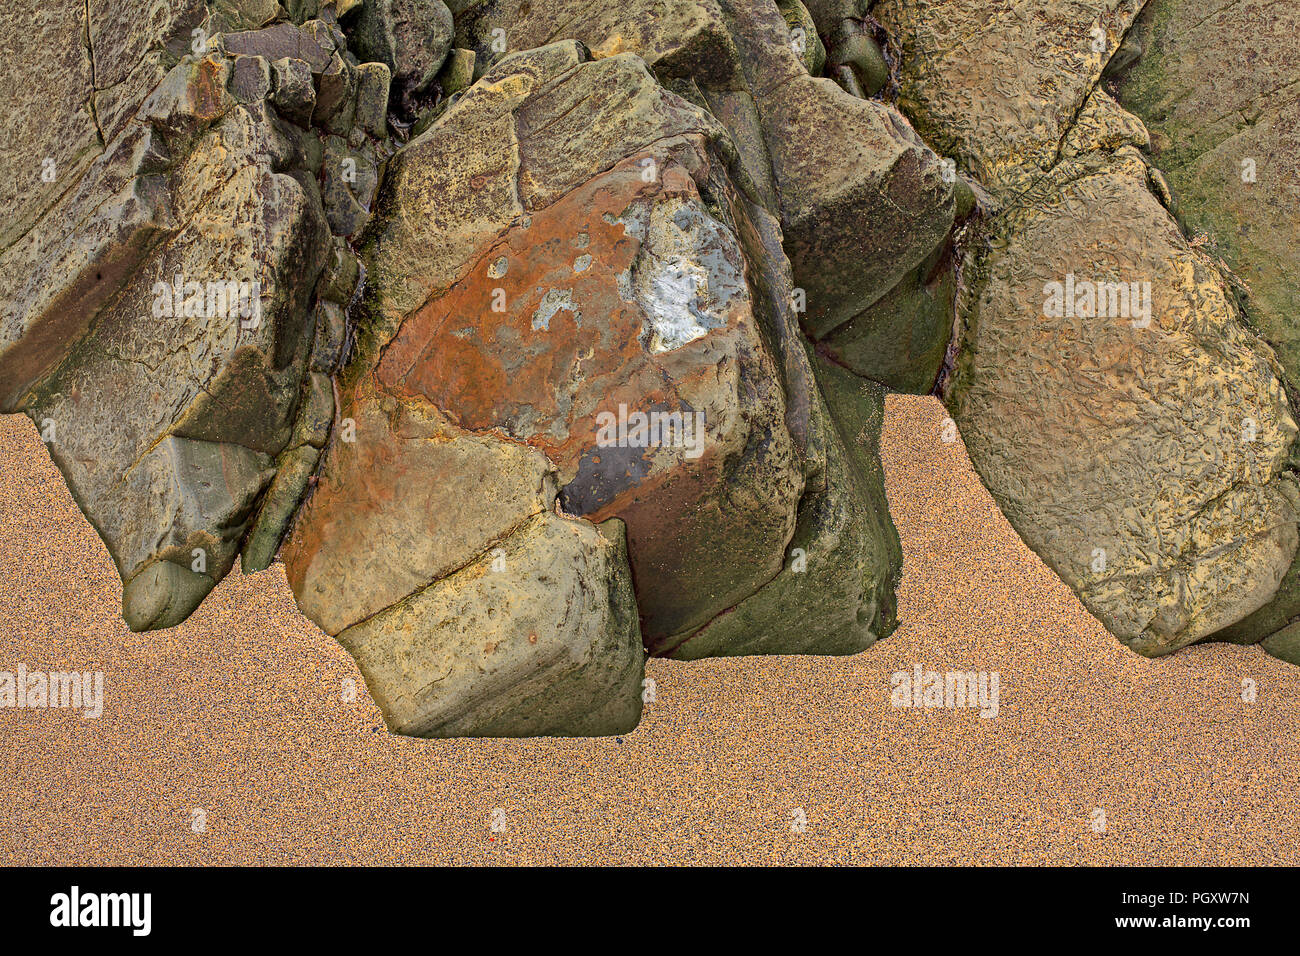 Rocks with fossilised plants on the beach at Clogher Strand, Dingle, Irleand Stock Photo